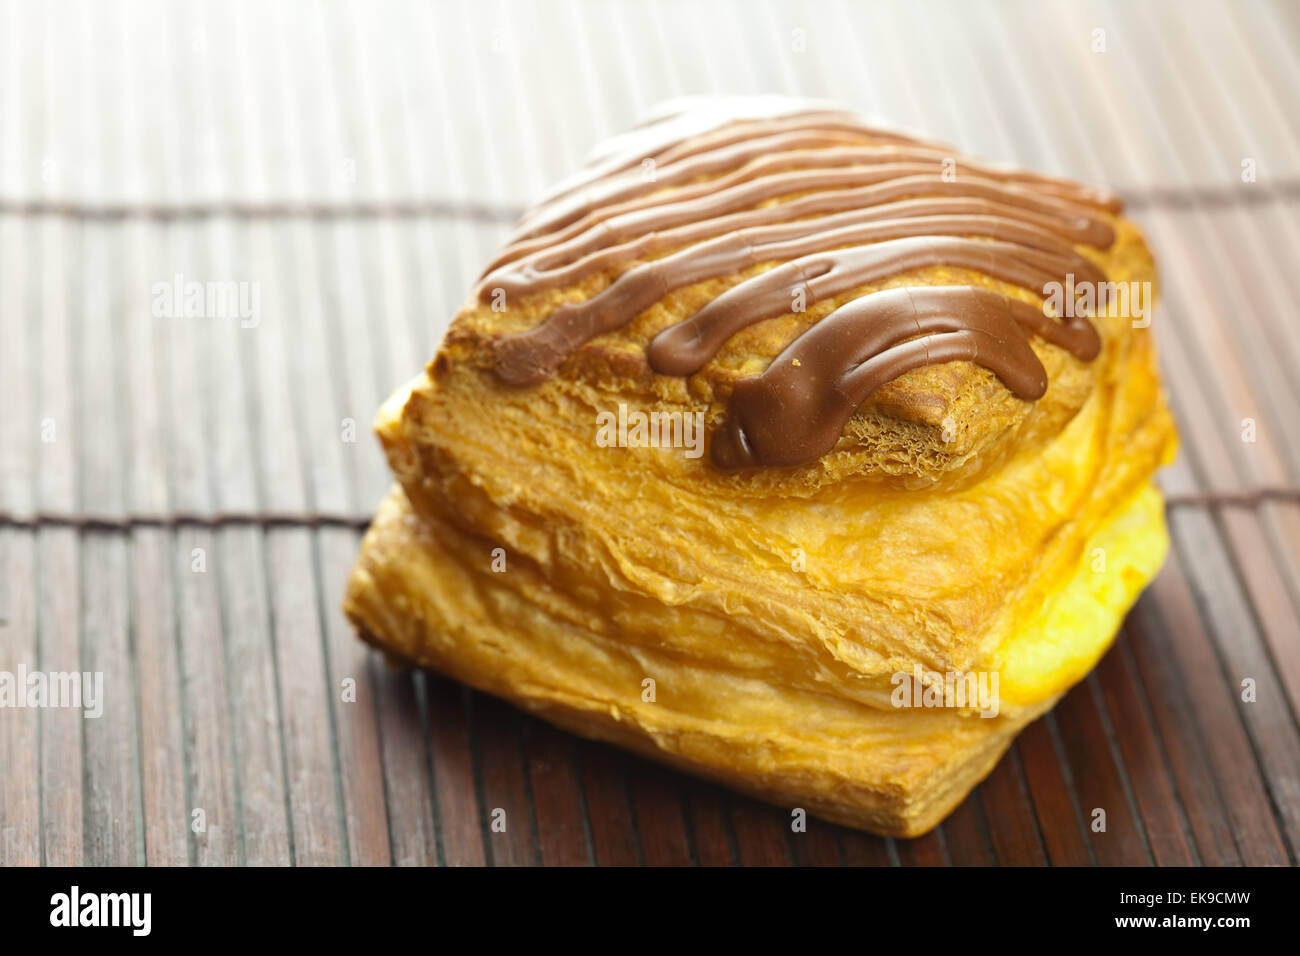 cake with chocolate lying on a bamboo mat Stock Photo